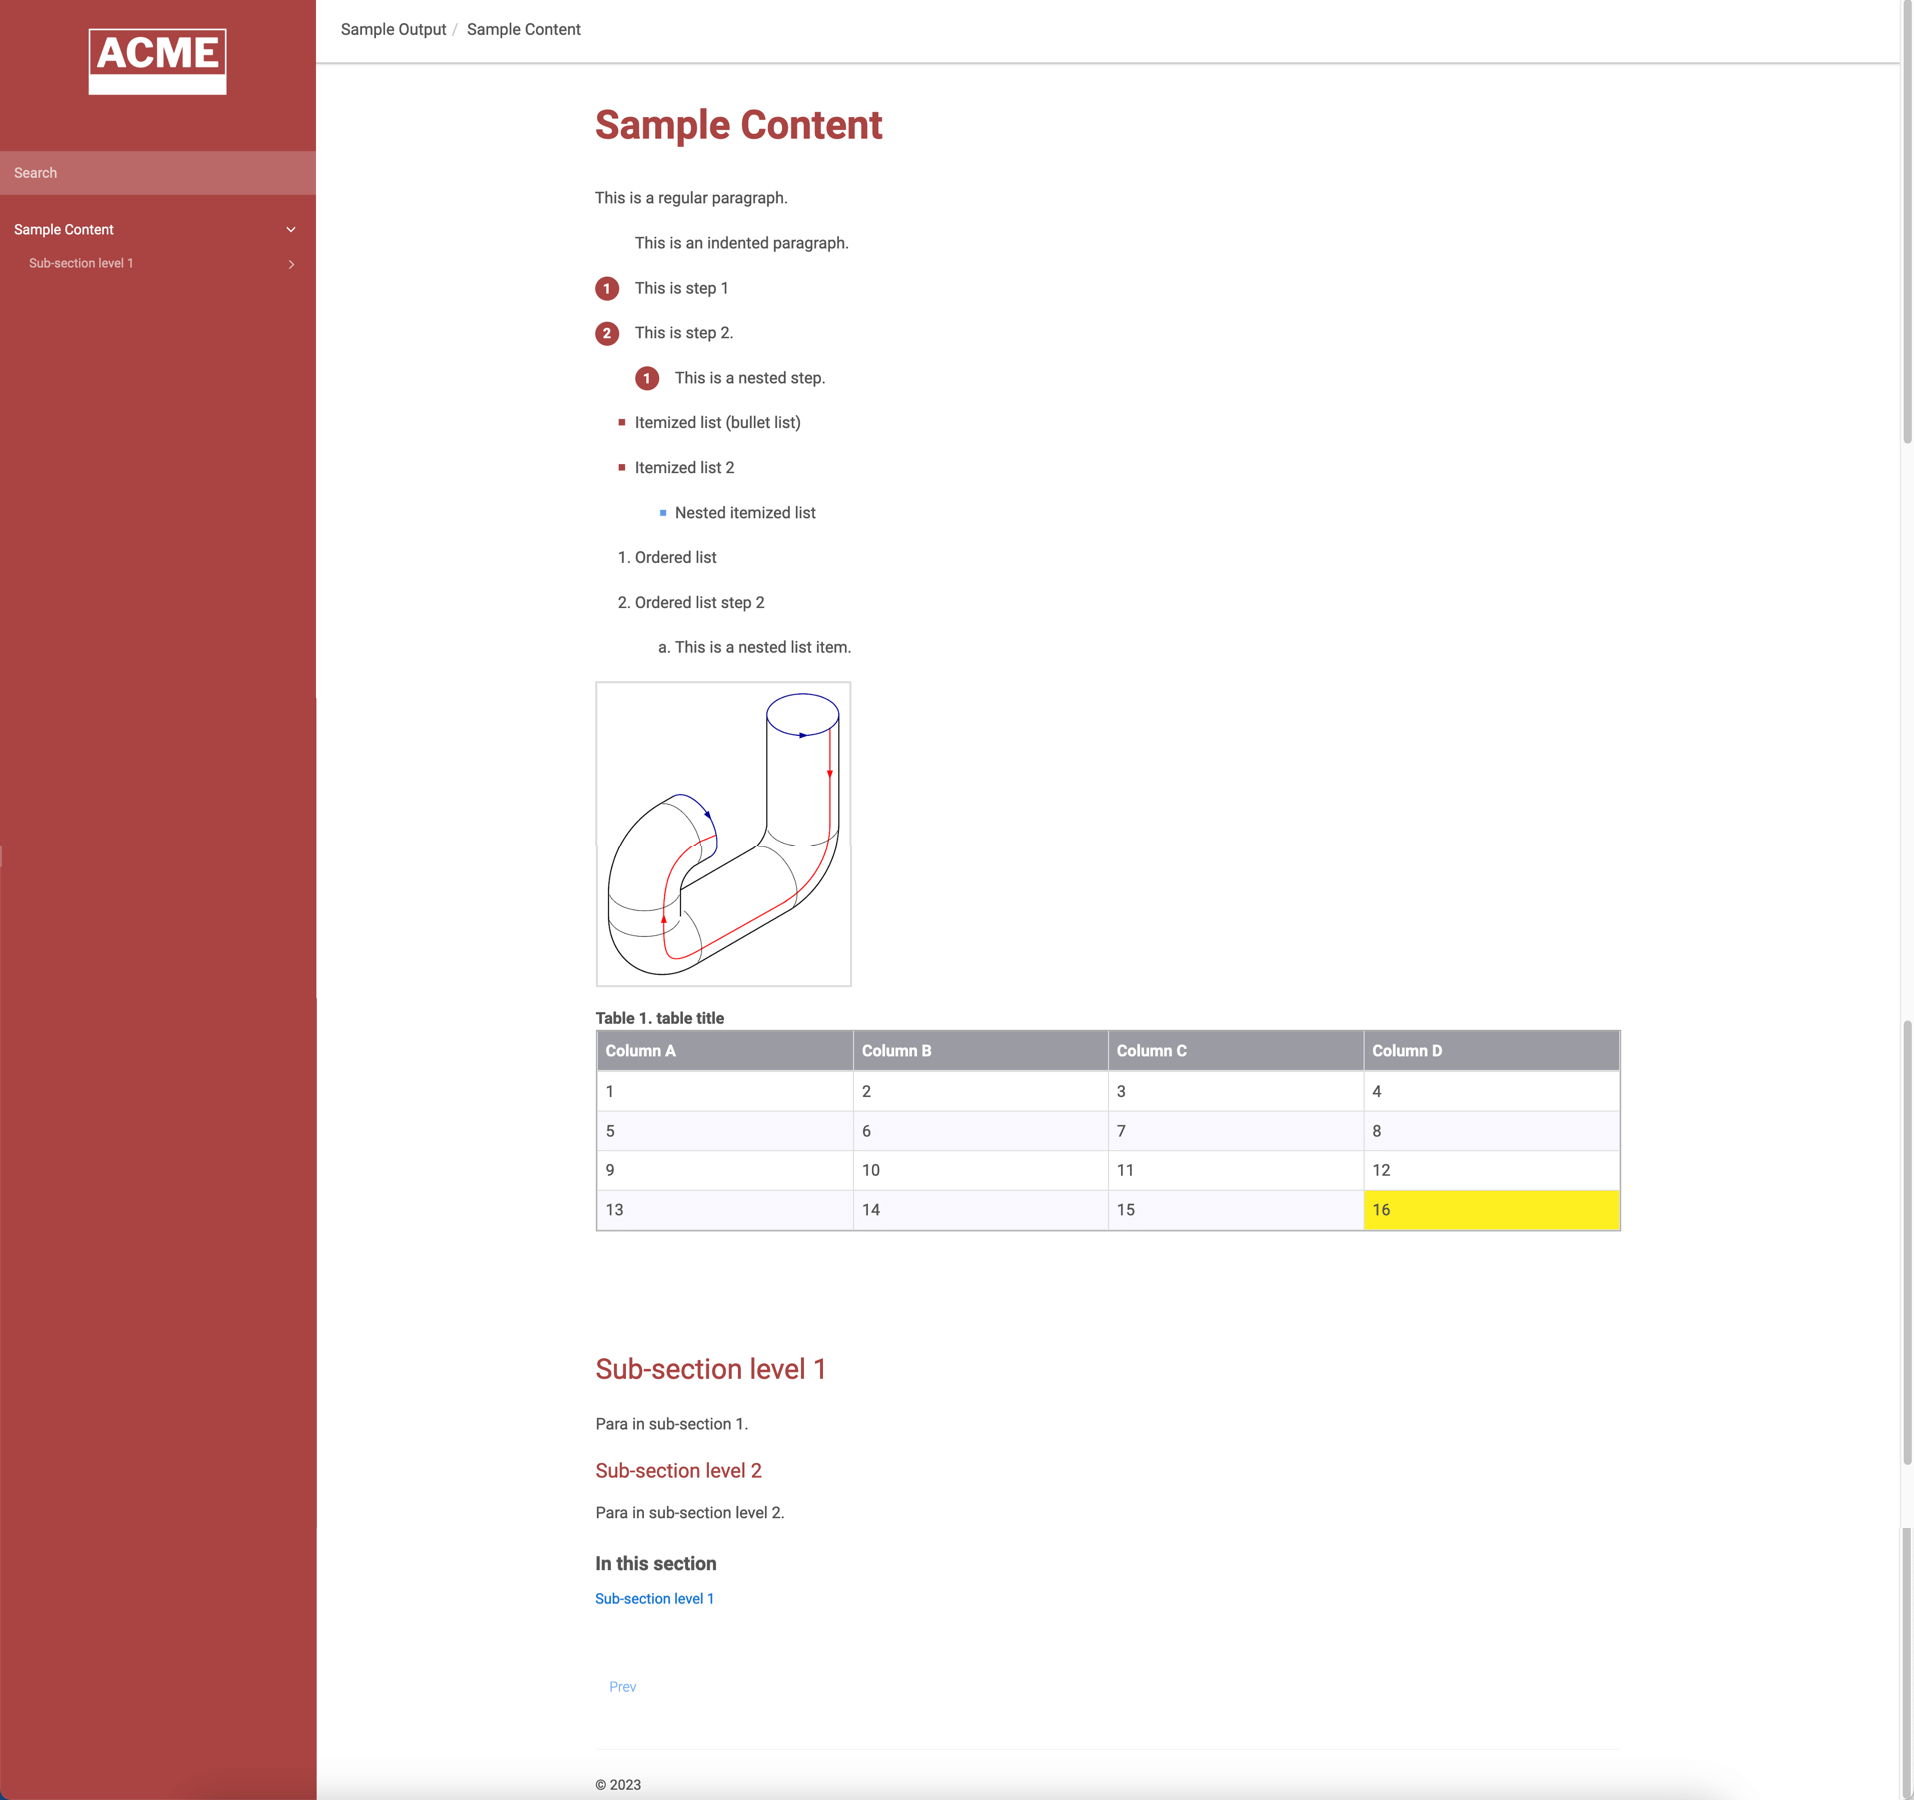 Help page with custom styling for an HTML5 Help Center. The side panel is red, an Acme logo is at the top, and the text is mostly black with red numbers for procedure numbers. The table is formatted to have a gray header, alternate row shading, and the last cell has a yellow background.